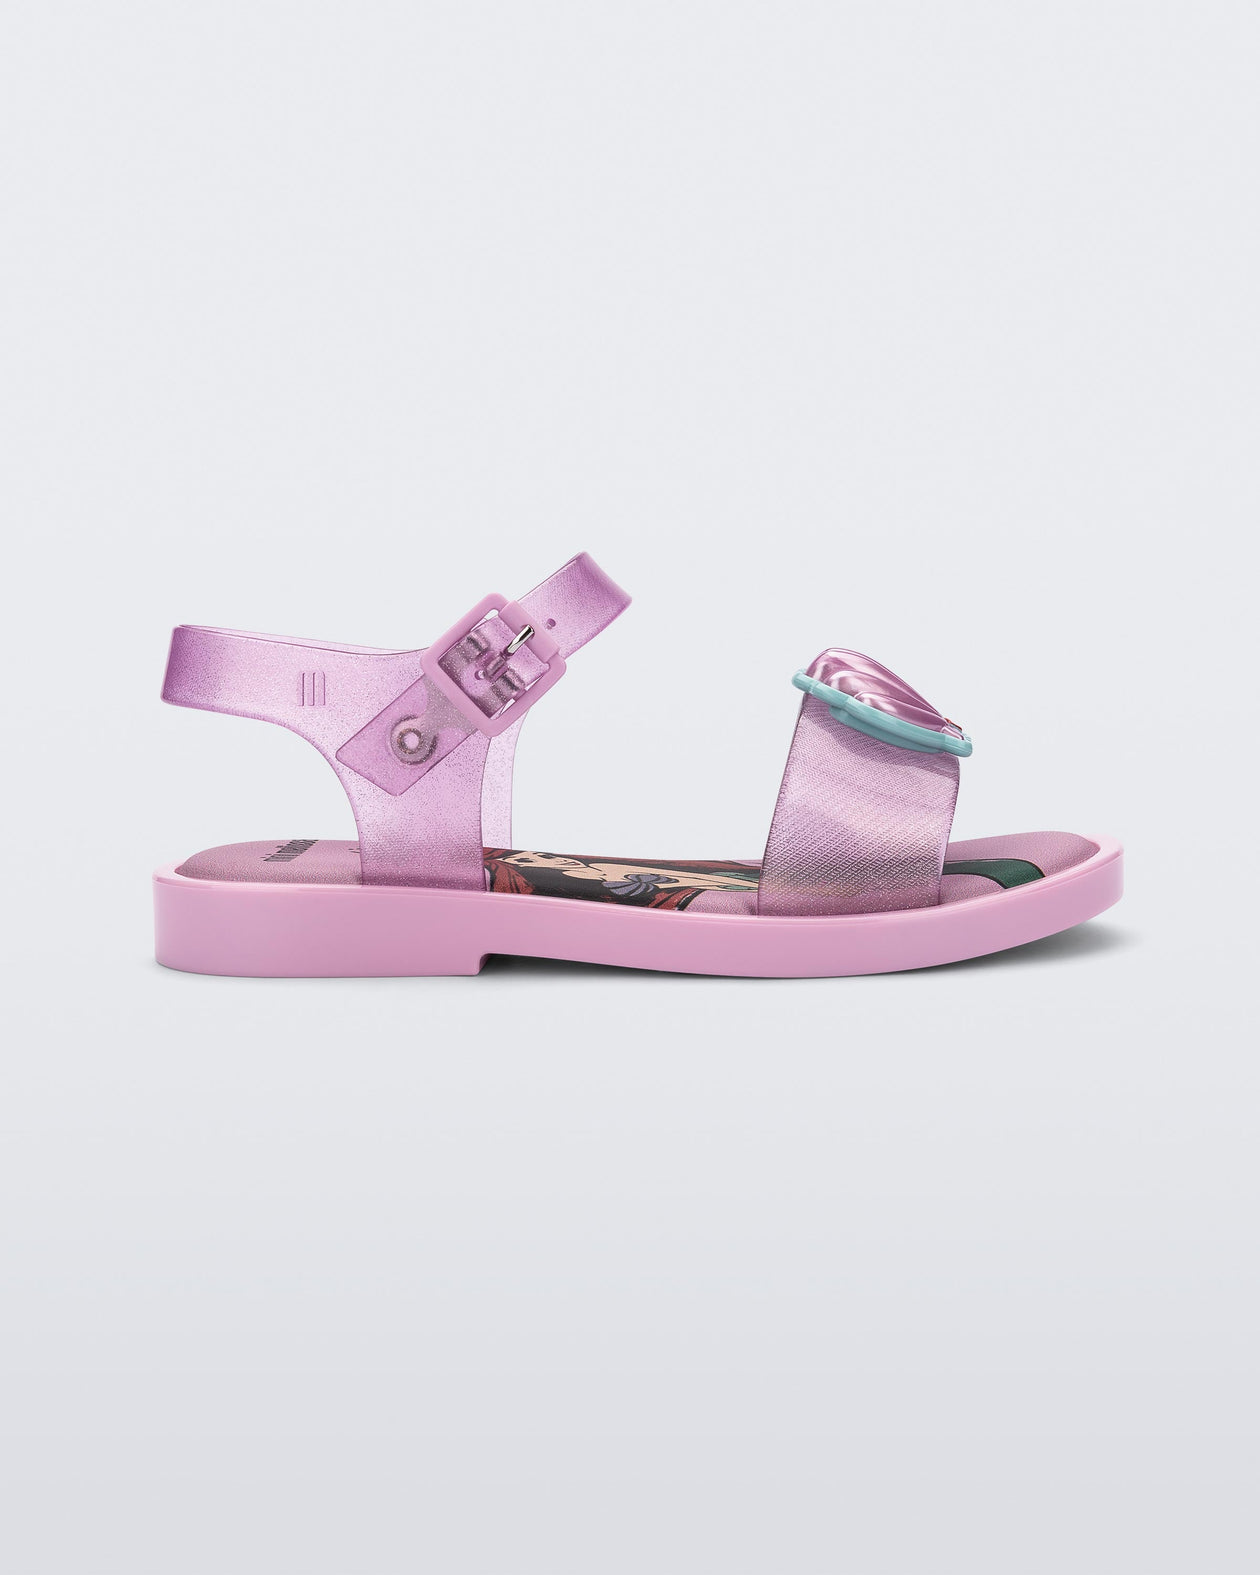 Side view of a glitter pink Mini Melissa Mar Sandal Princess sandal with a seashell detail on the front strap, an ankle strap and Princess Ariel soul